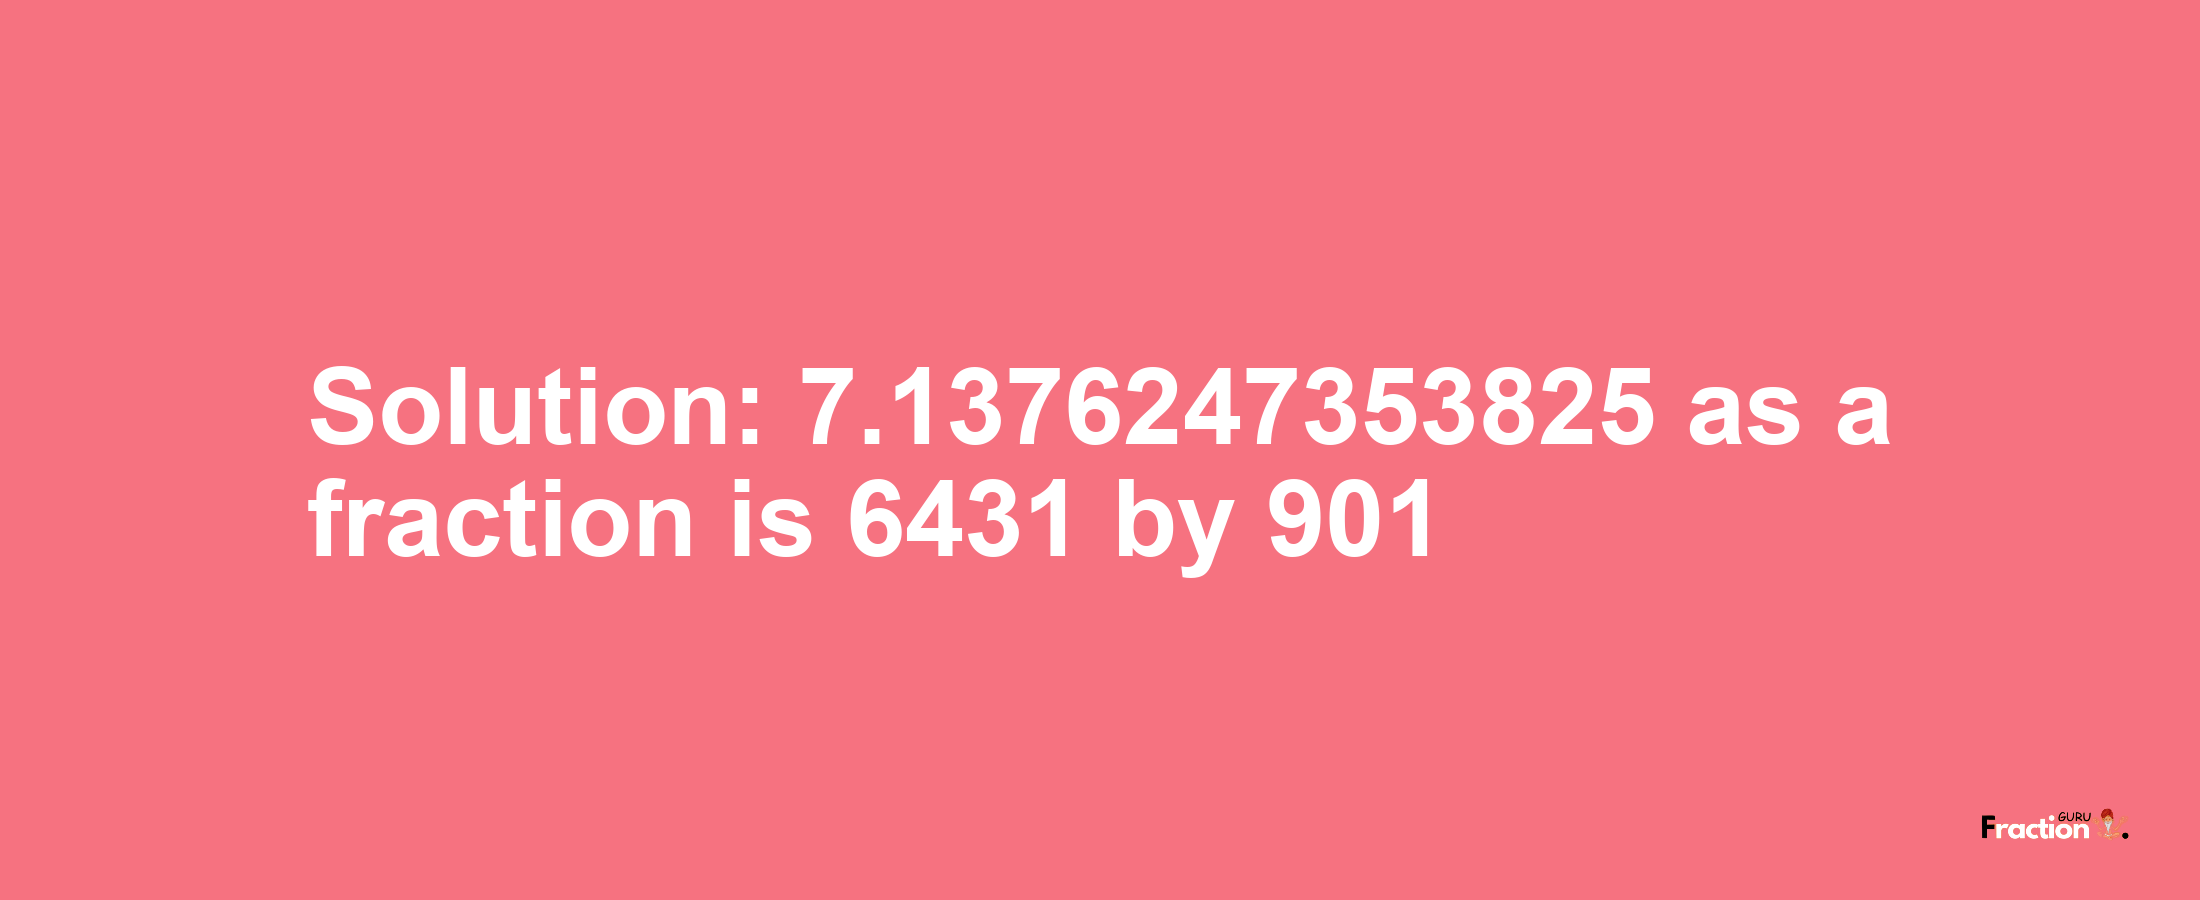 Solution:7.1376247353825 as a fraction is 6431/901